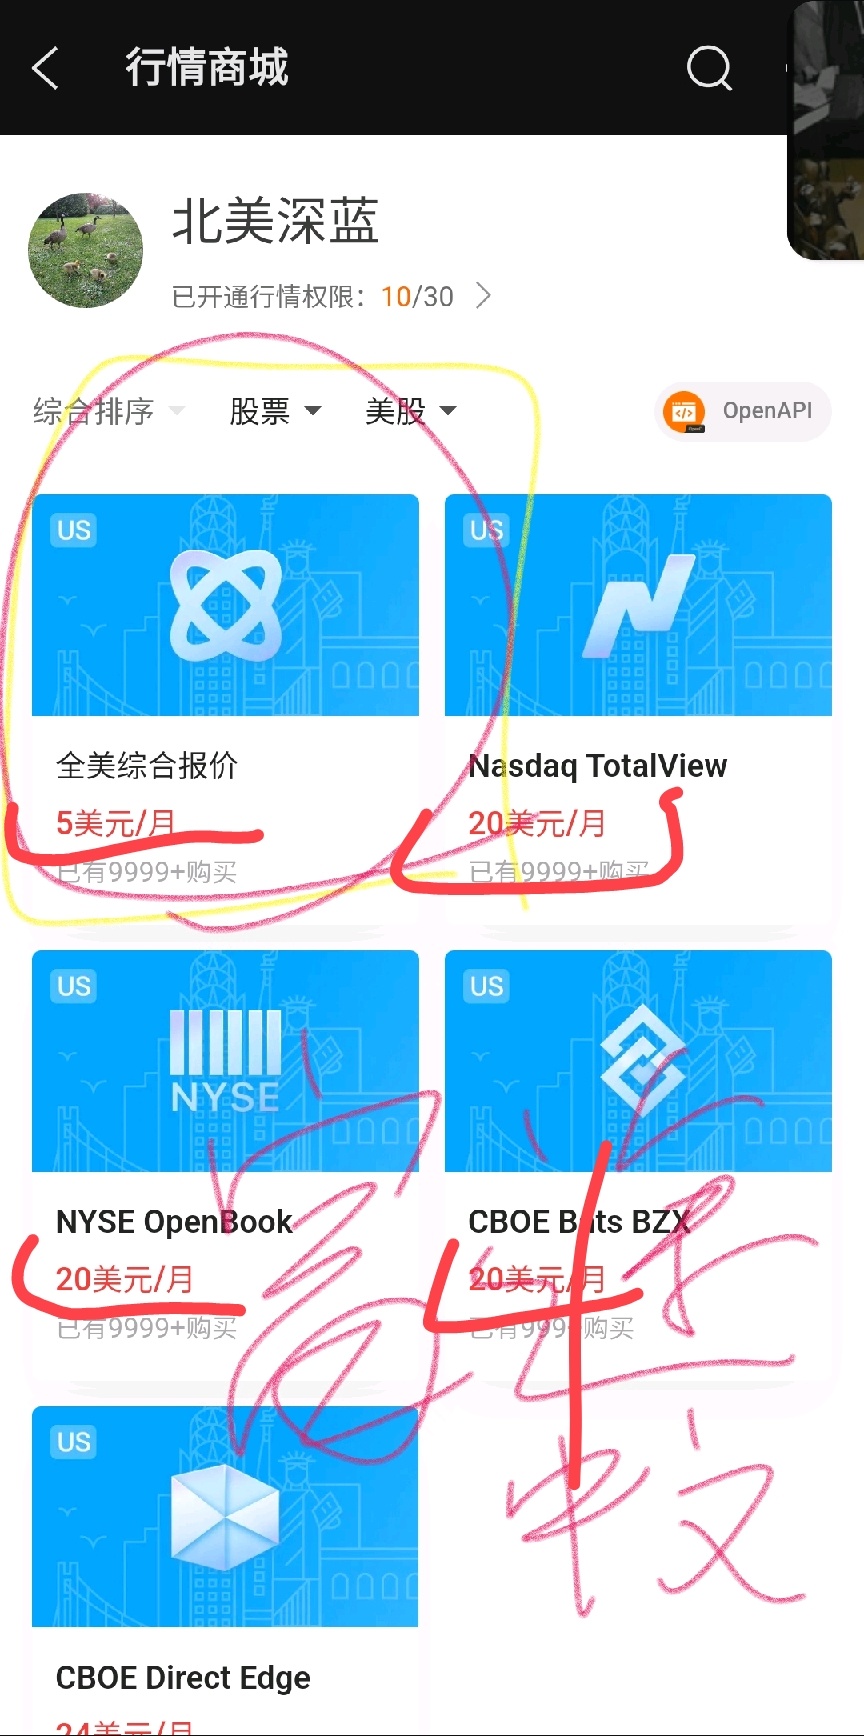 ❌ Problem feedback 🔴 Market store The price difference between the two versions of the app, Futubull Niu Niu and MooMoo, is too big. Moreover, MooMoo can only ...